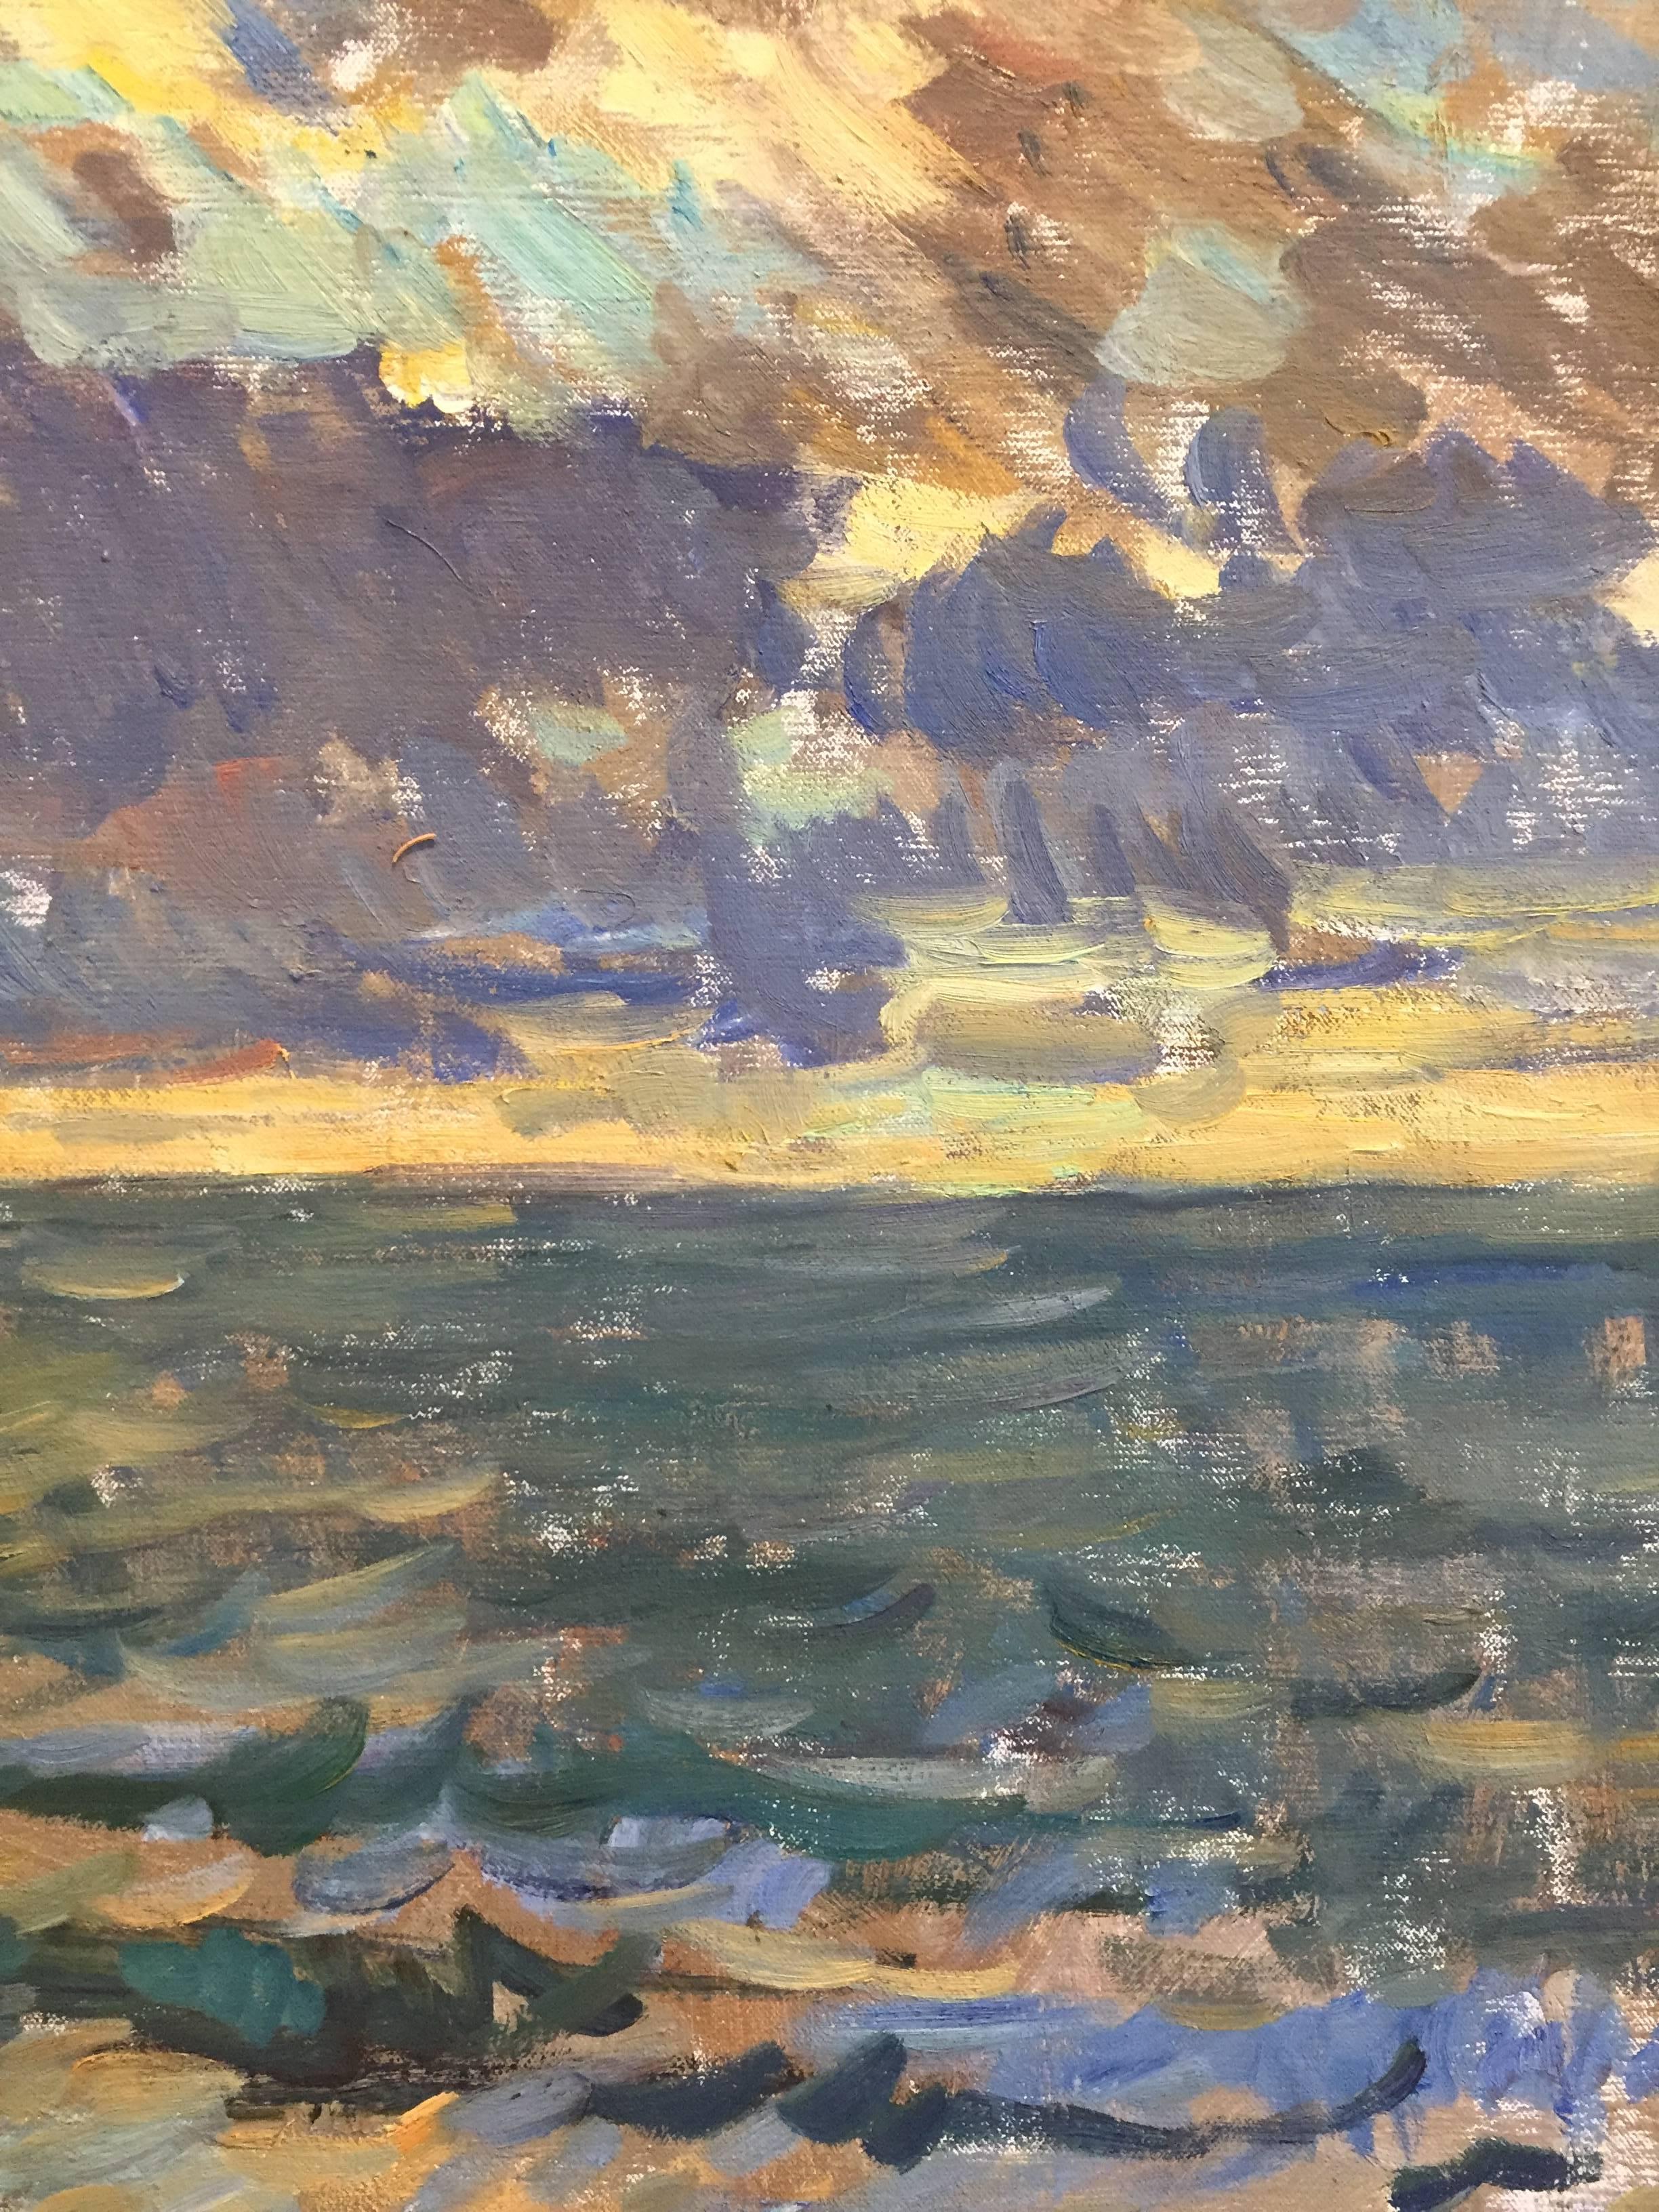 Painted en plein-air, at Fosters Memorial Beach, aka Long Beach, Noyac, Sag Harbor, New York. A large, backlit, purple cloud covers a setting sun. Hues of teal pop out of the water. Loose, thick, brushstrokes create an atmosphere which moves. The